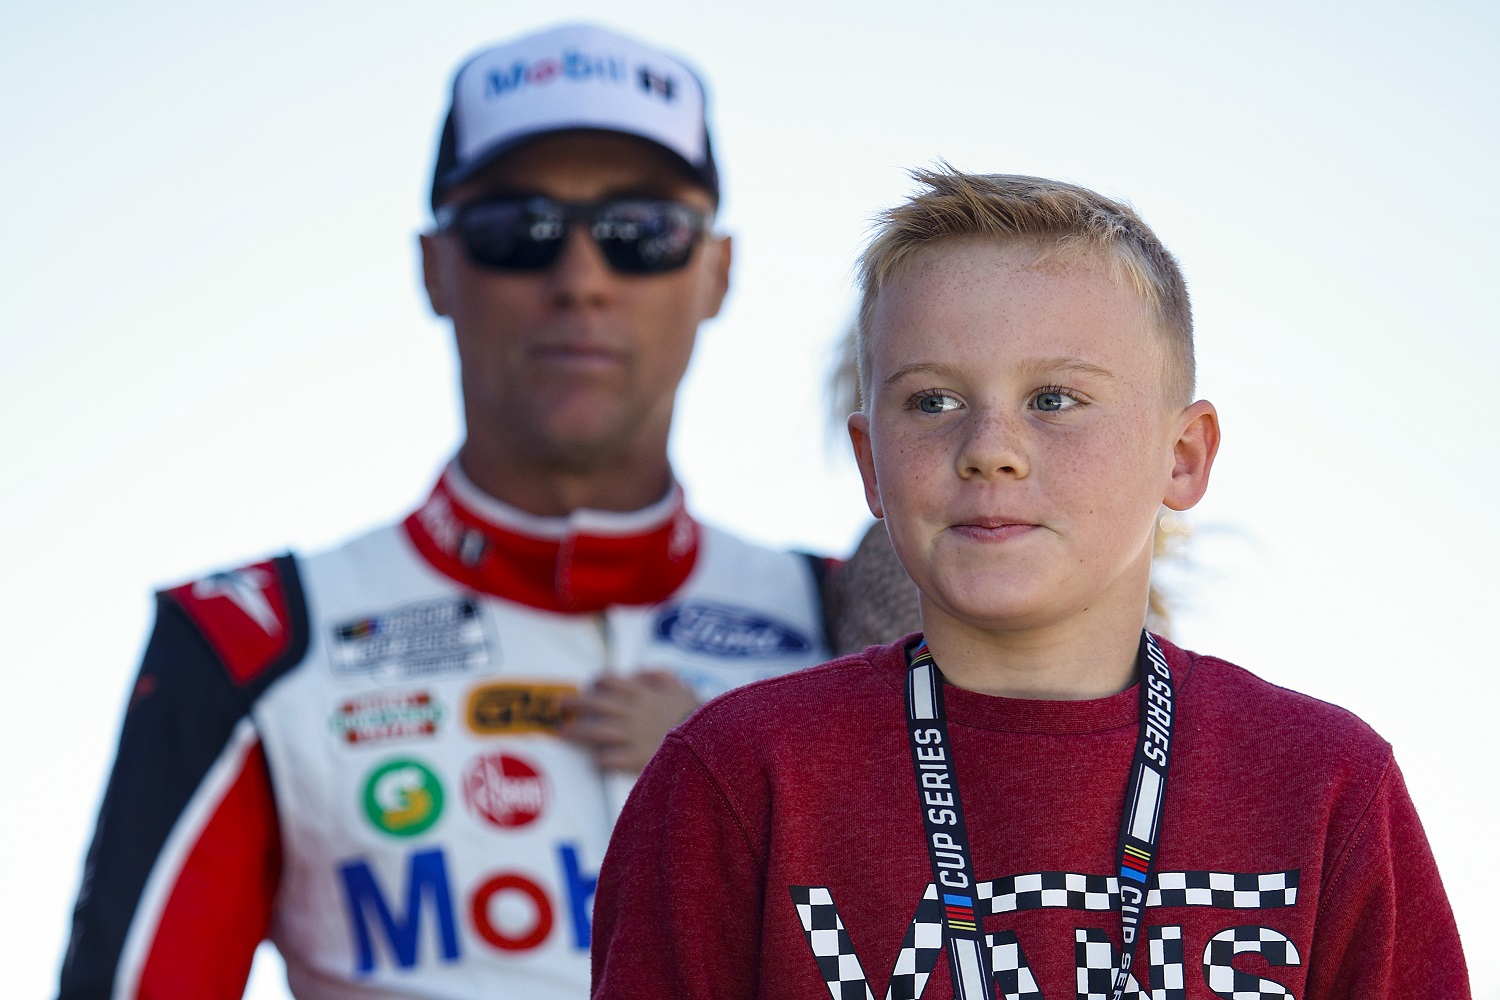 Keelan Harvick, the son of Kevin Harvick, walks onstage during driver intros prior to the NASCAR Cup Series Folds of Honor QuikTrip 500 at Atlanta Motor Speedway on March 20, 2022.